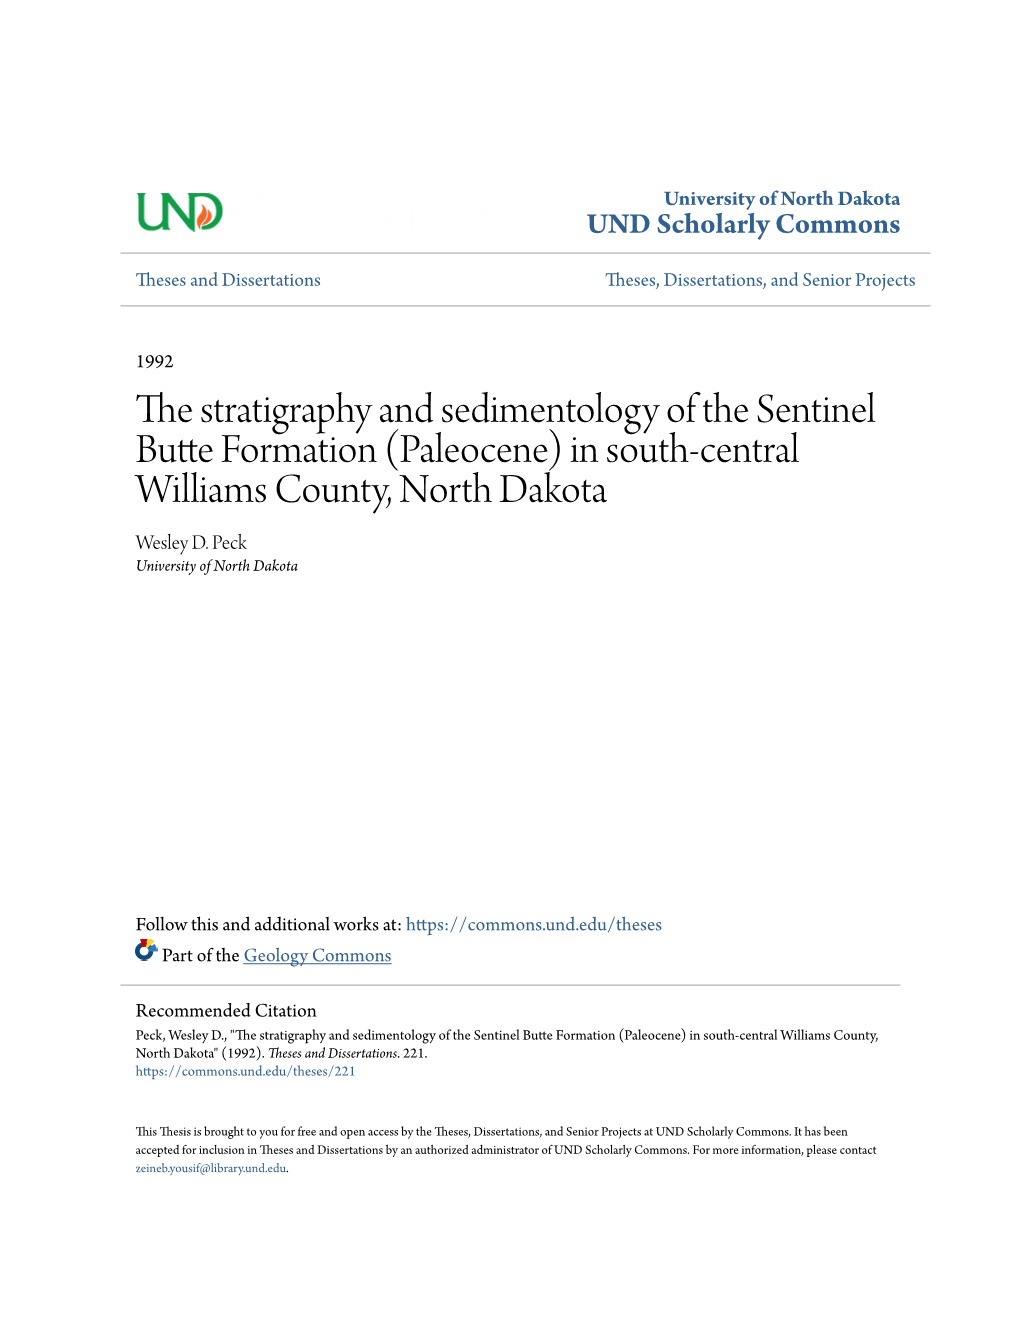 The Stratigraphy and Sedimentology of the Sentinel Butte Formation (Paleocene) in South-Central Williams County, North Dakota